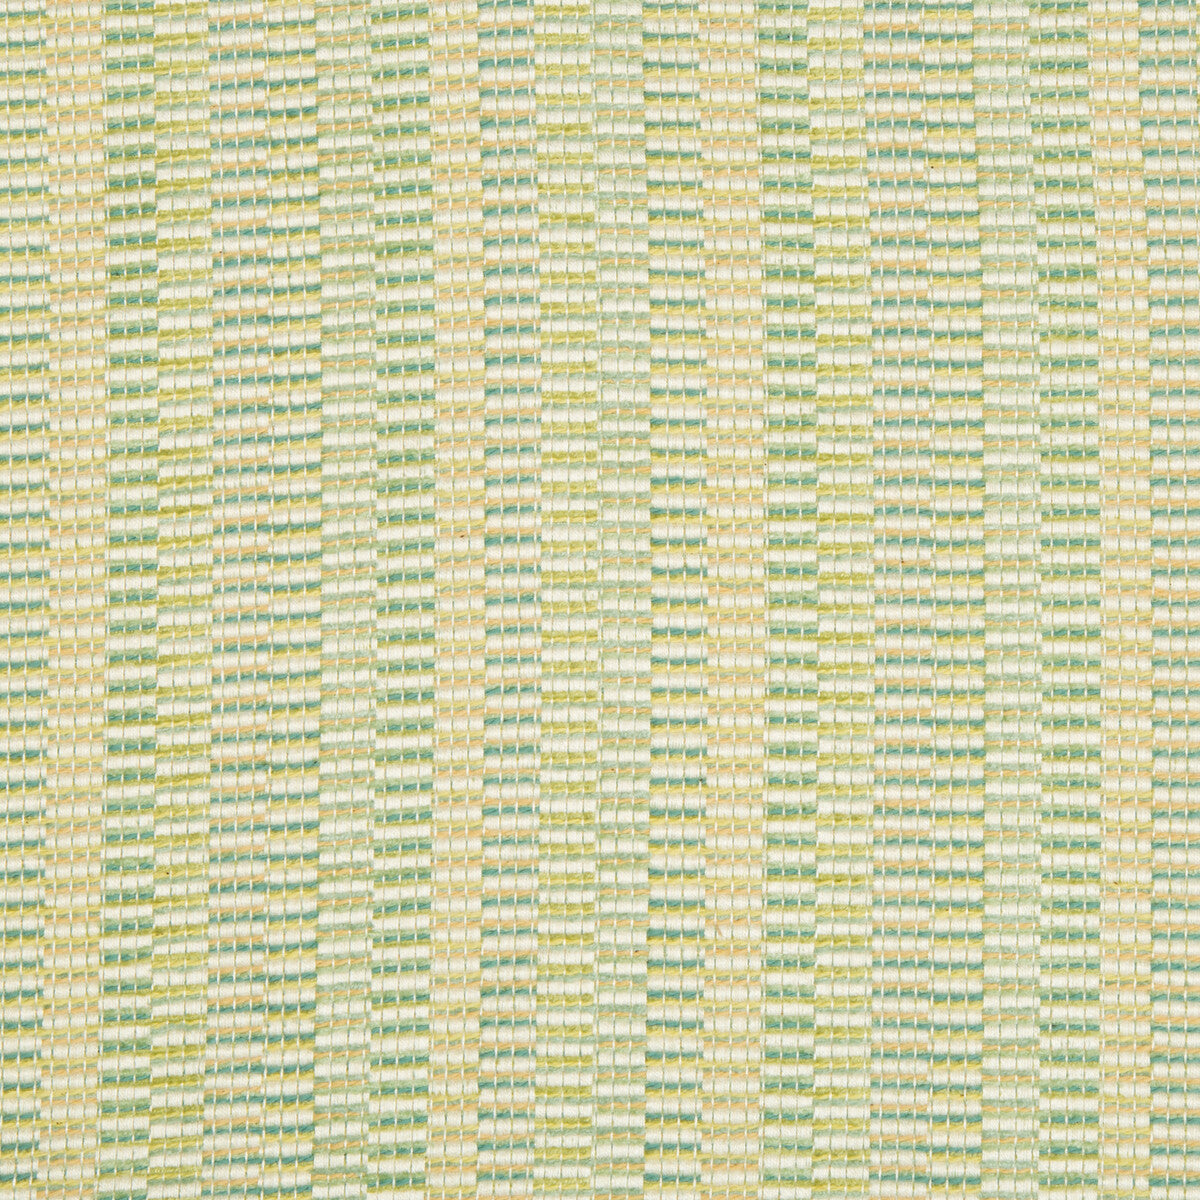 Kravet Design fabric in 34694-23 color - pattern 34694.23.0 - by Kravet Design in the Crypton Home collection